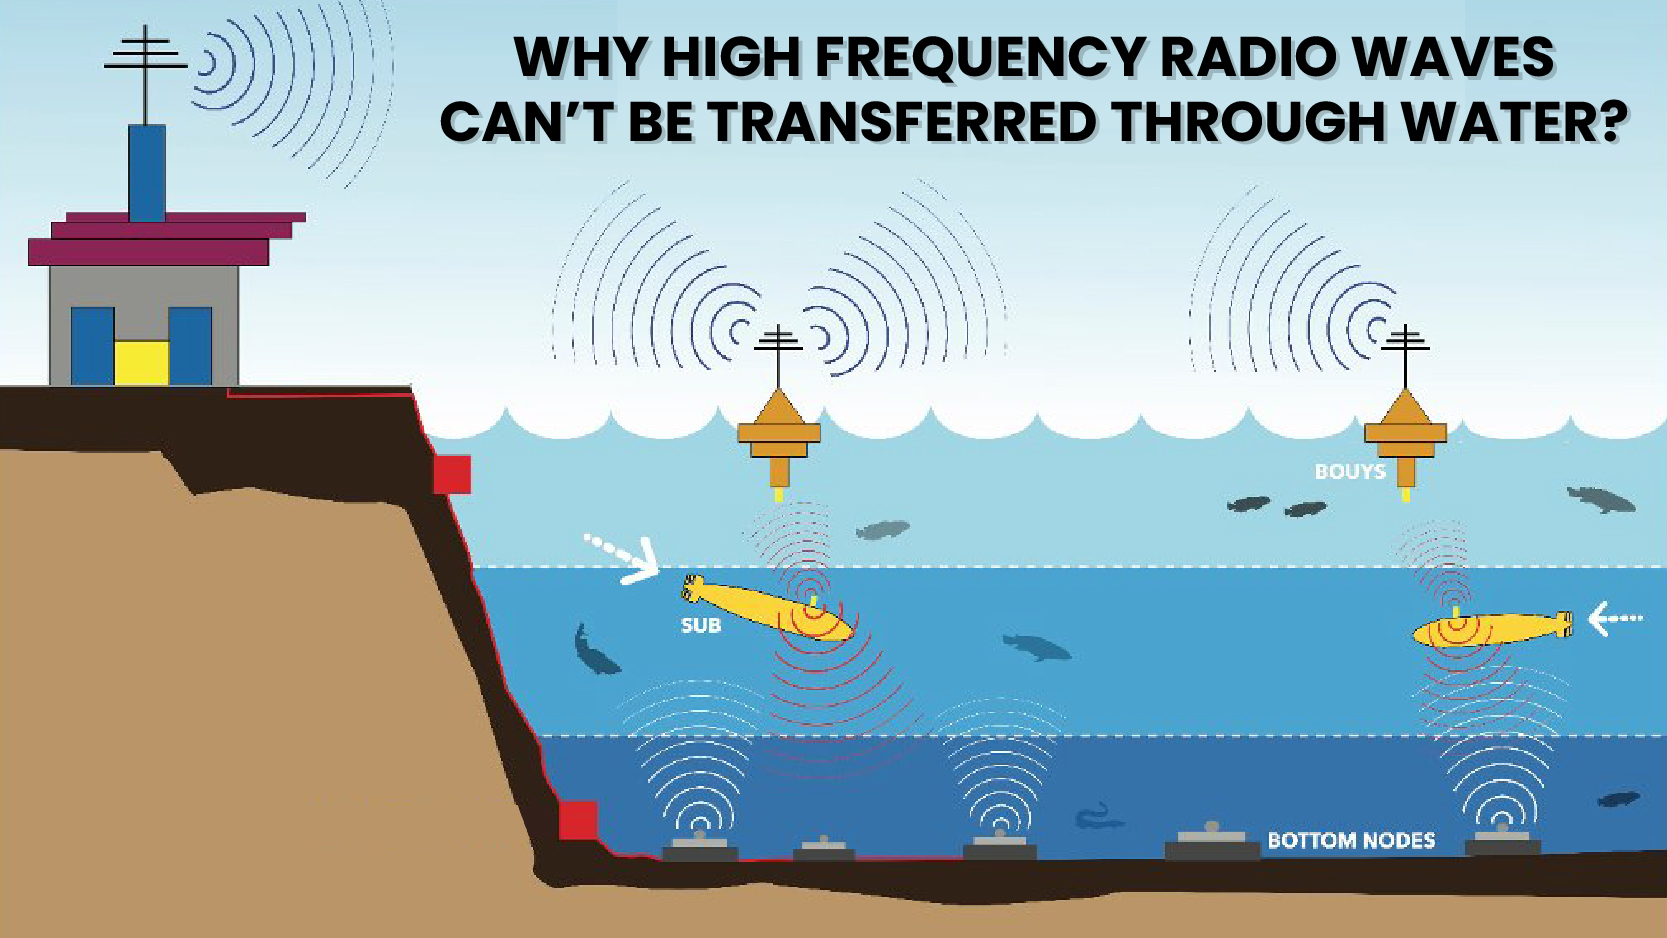 Why high frequency radio waves can’t be transferred through water?